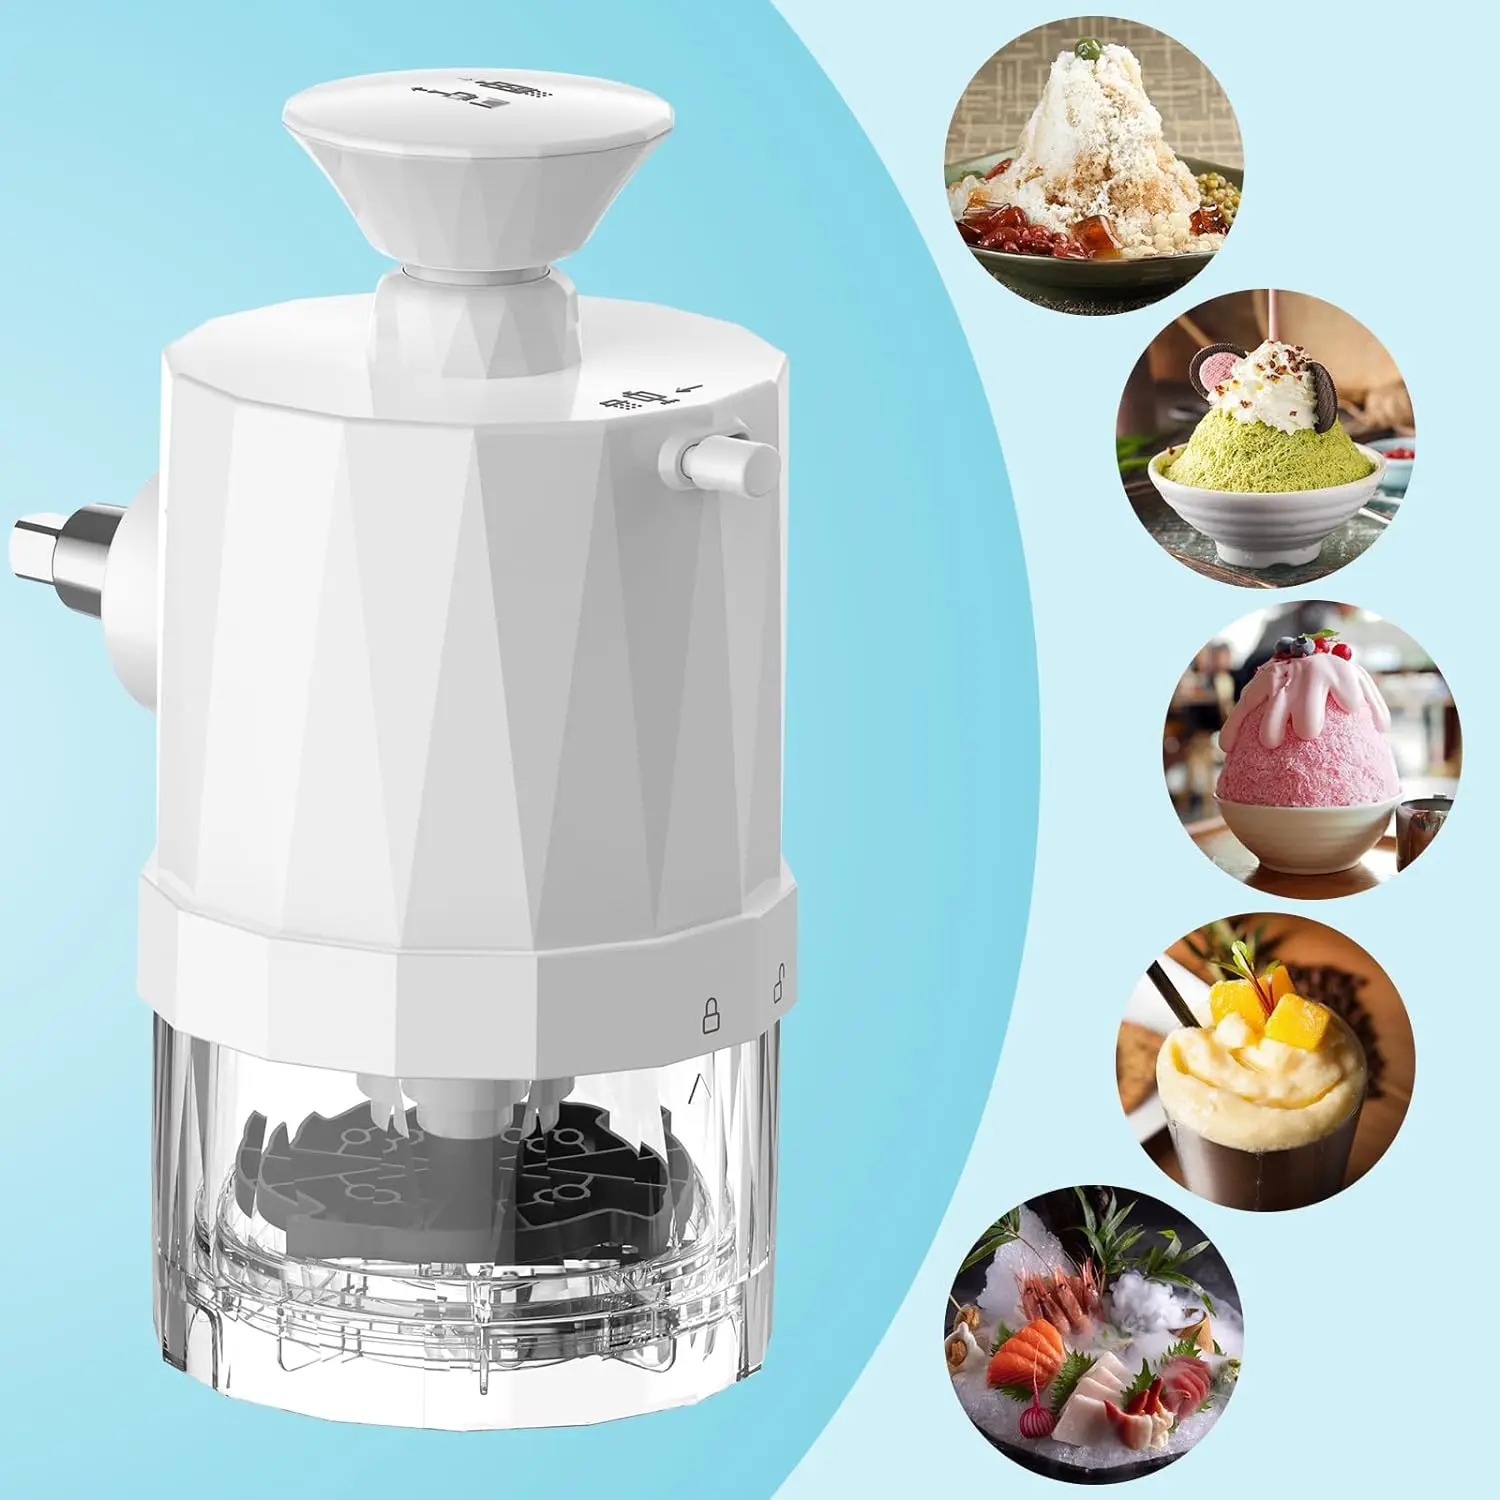 https://ae01.alicdn.com/kf/Sabbe044605544183a88757d468d037ddF/Snow-Cone-Machine-with-8-Ice-Molds-Shaved-Ice-Attachment-for-KitchenAid-Stand-Mixer-As-Kitchen.jpg